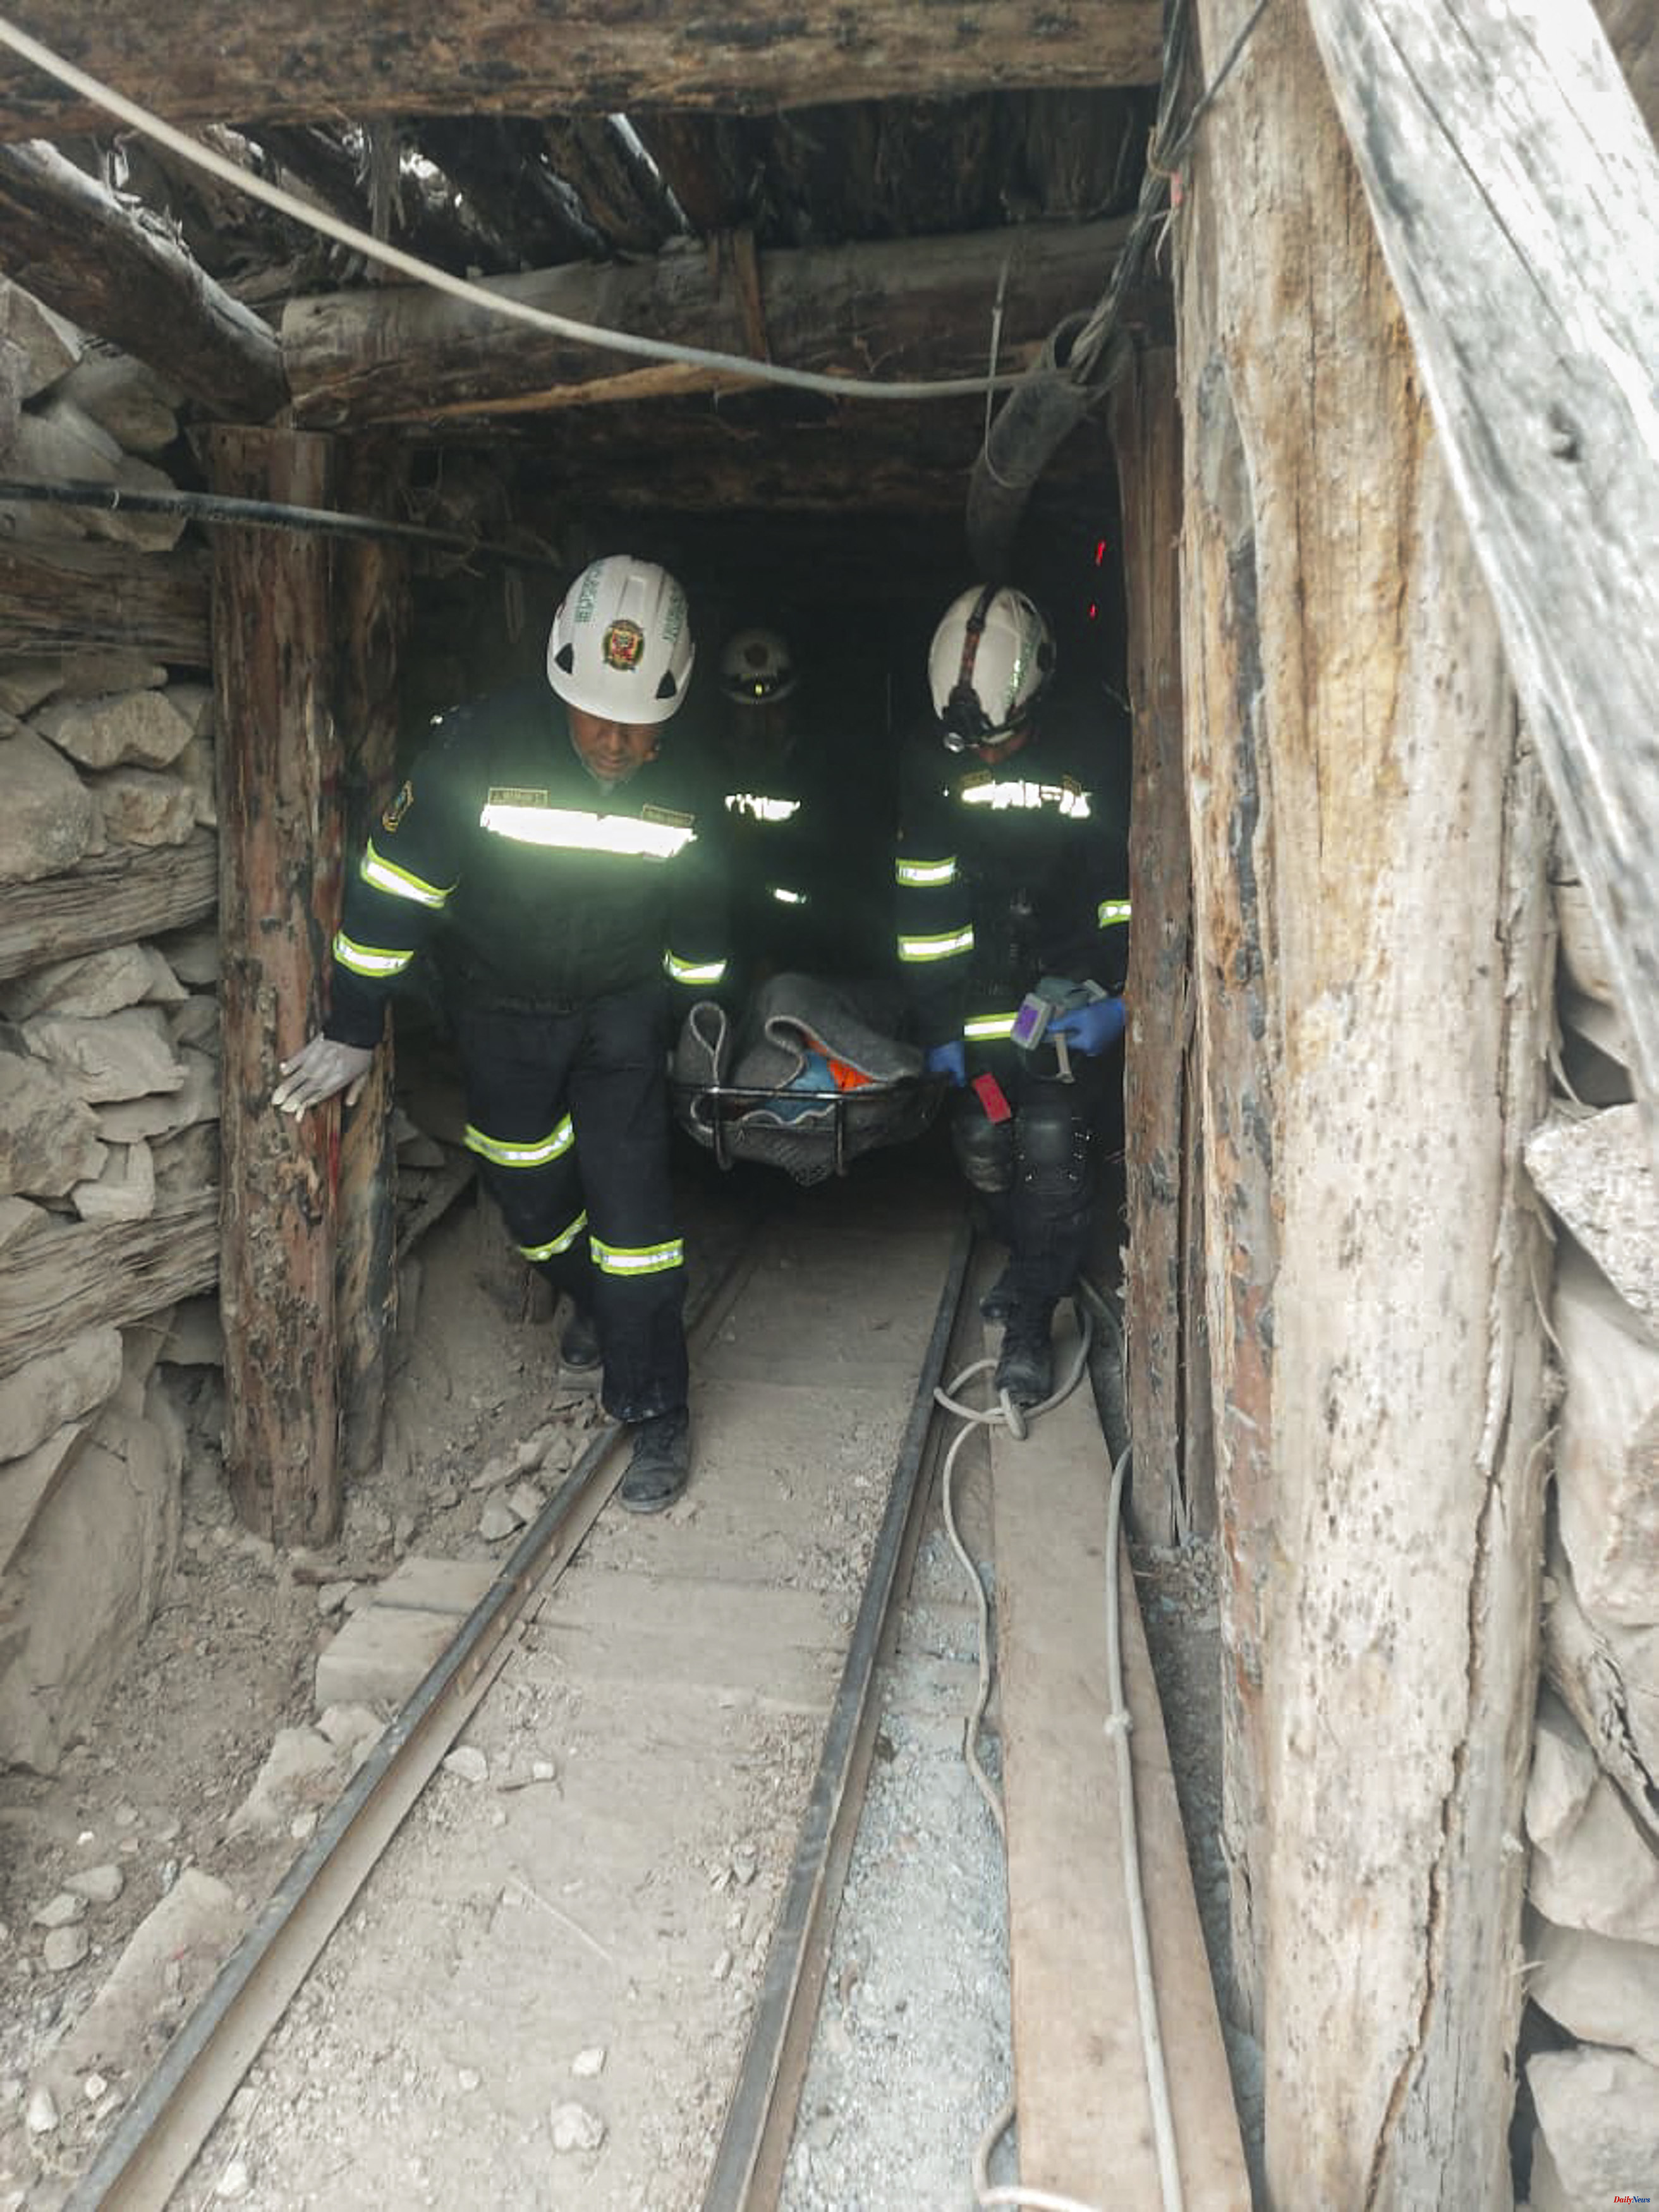 Peru A fire causes the death of 27 miners in the Arequipa region